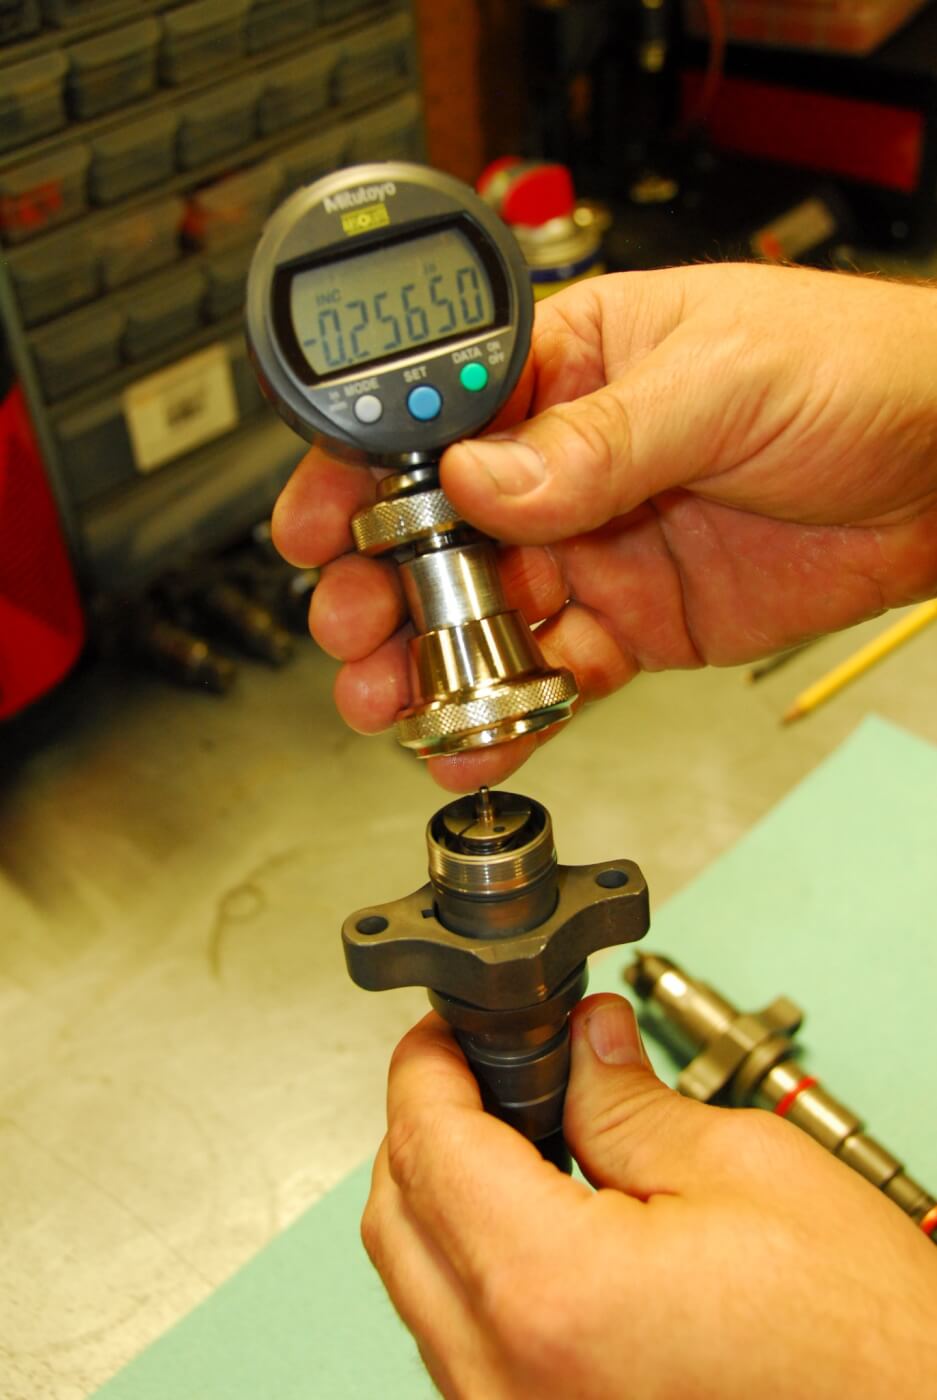 11. This gauge is fitted on the intermediate assembly of an injector to measure the air gap between the solenoid and armature, which can be adjusted with a shim.